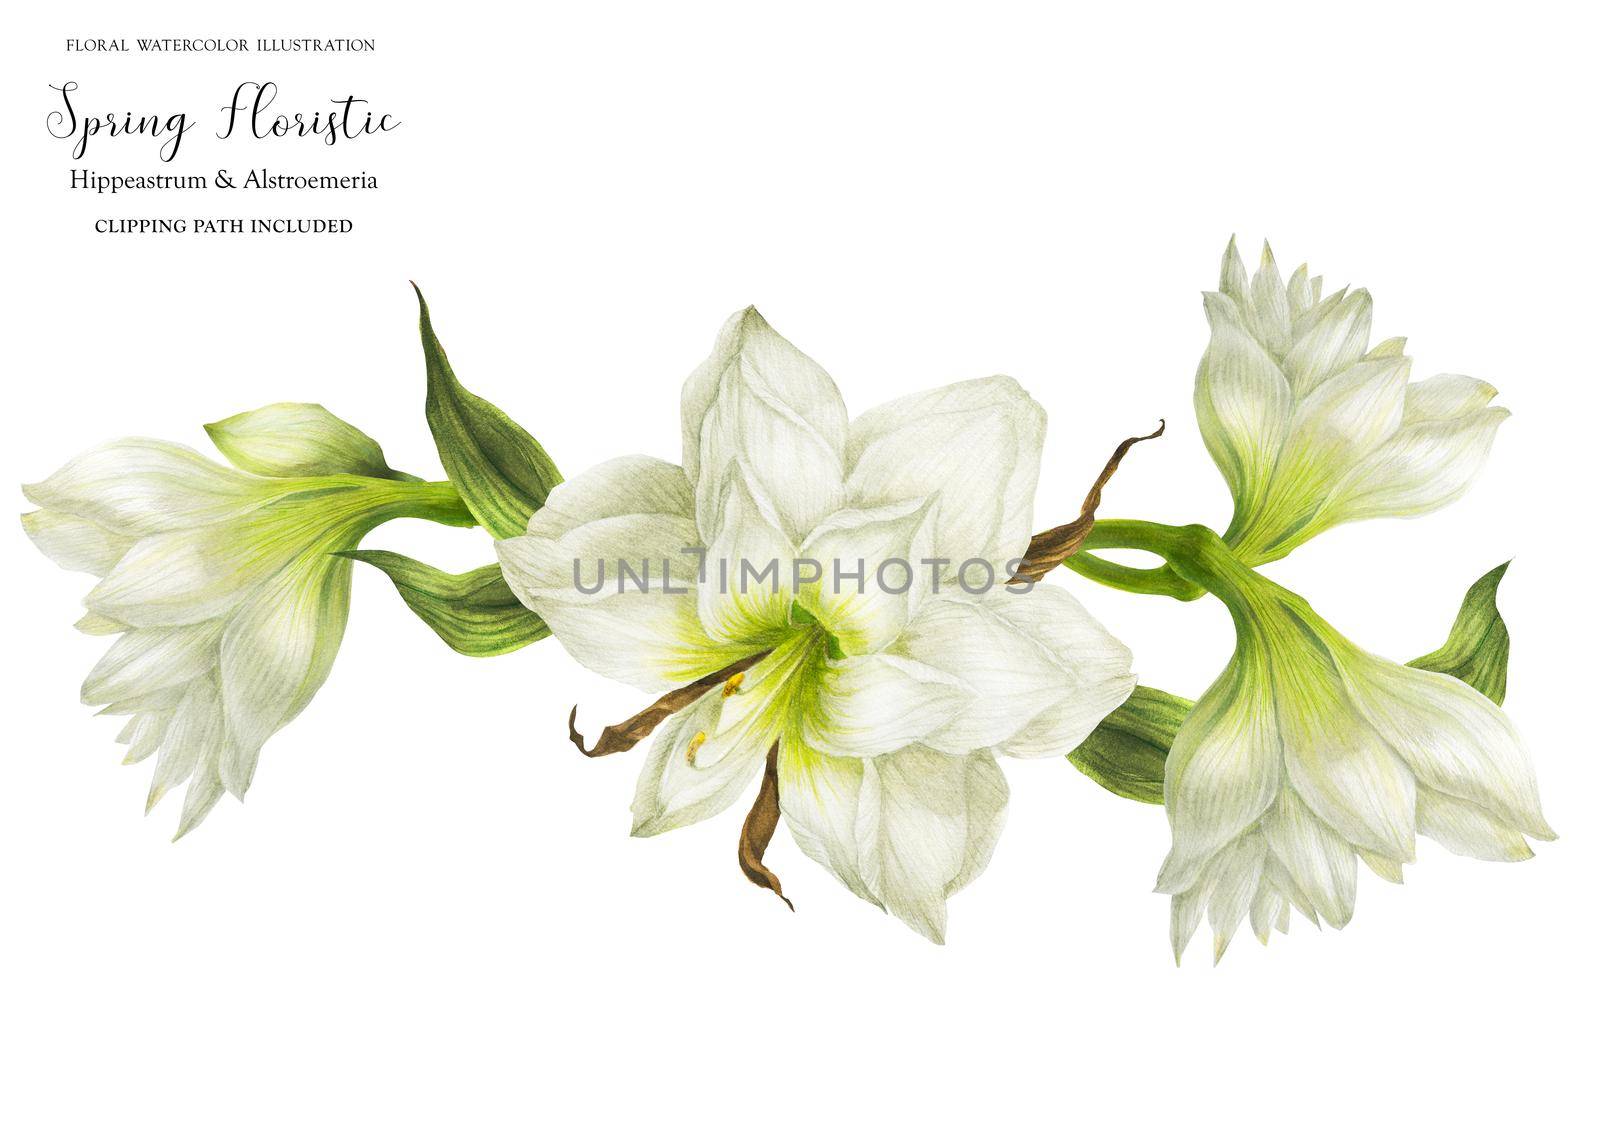 Wedding garland vignette with white hippeastrum flowers, realistic watercolor illustration with clipping path